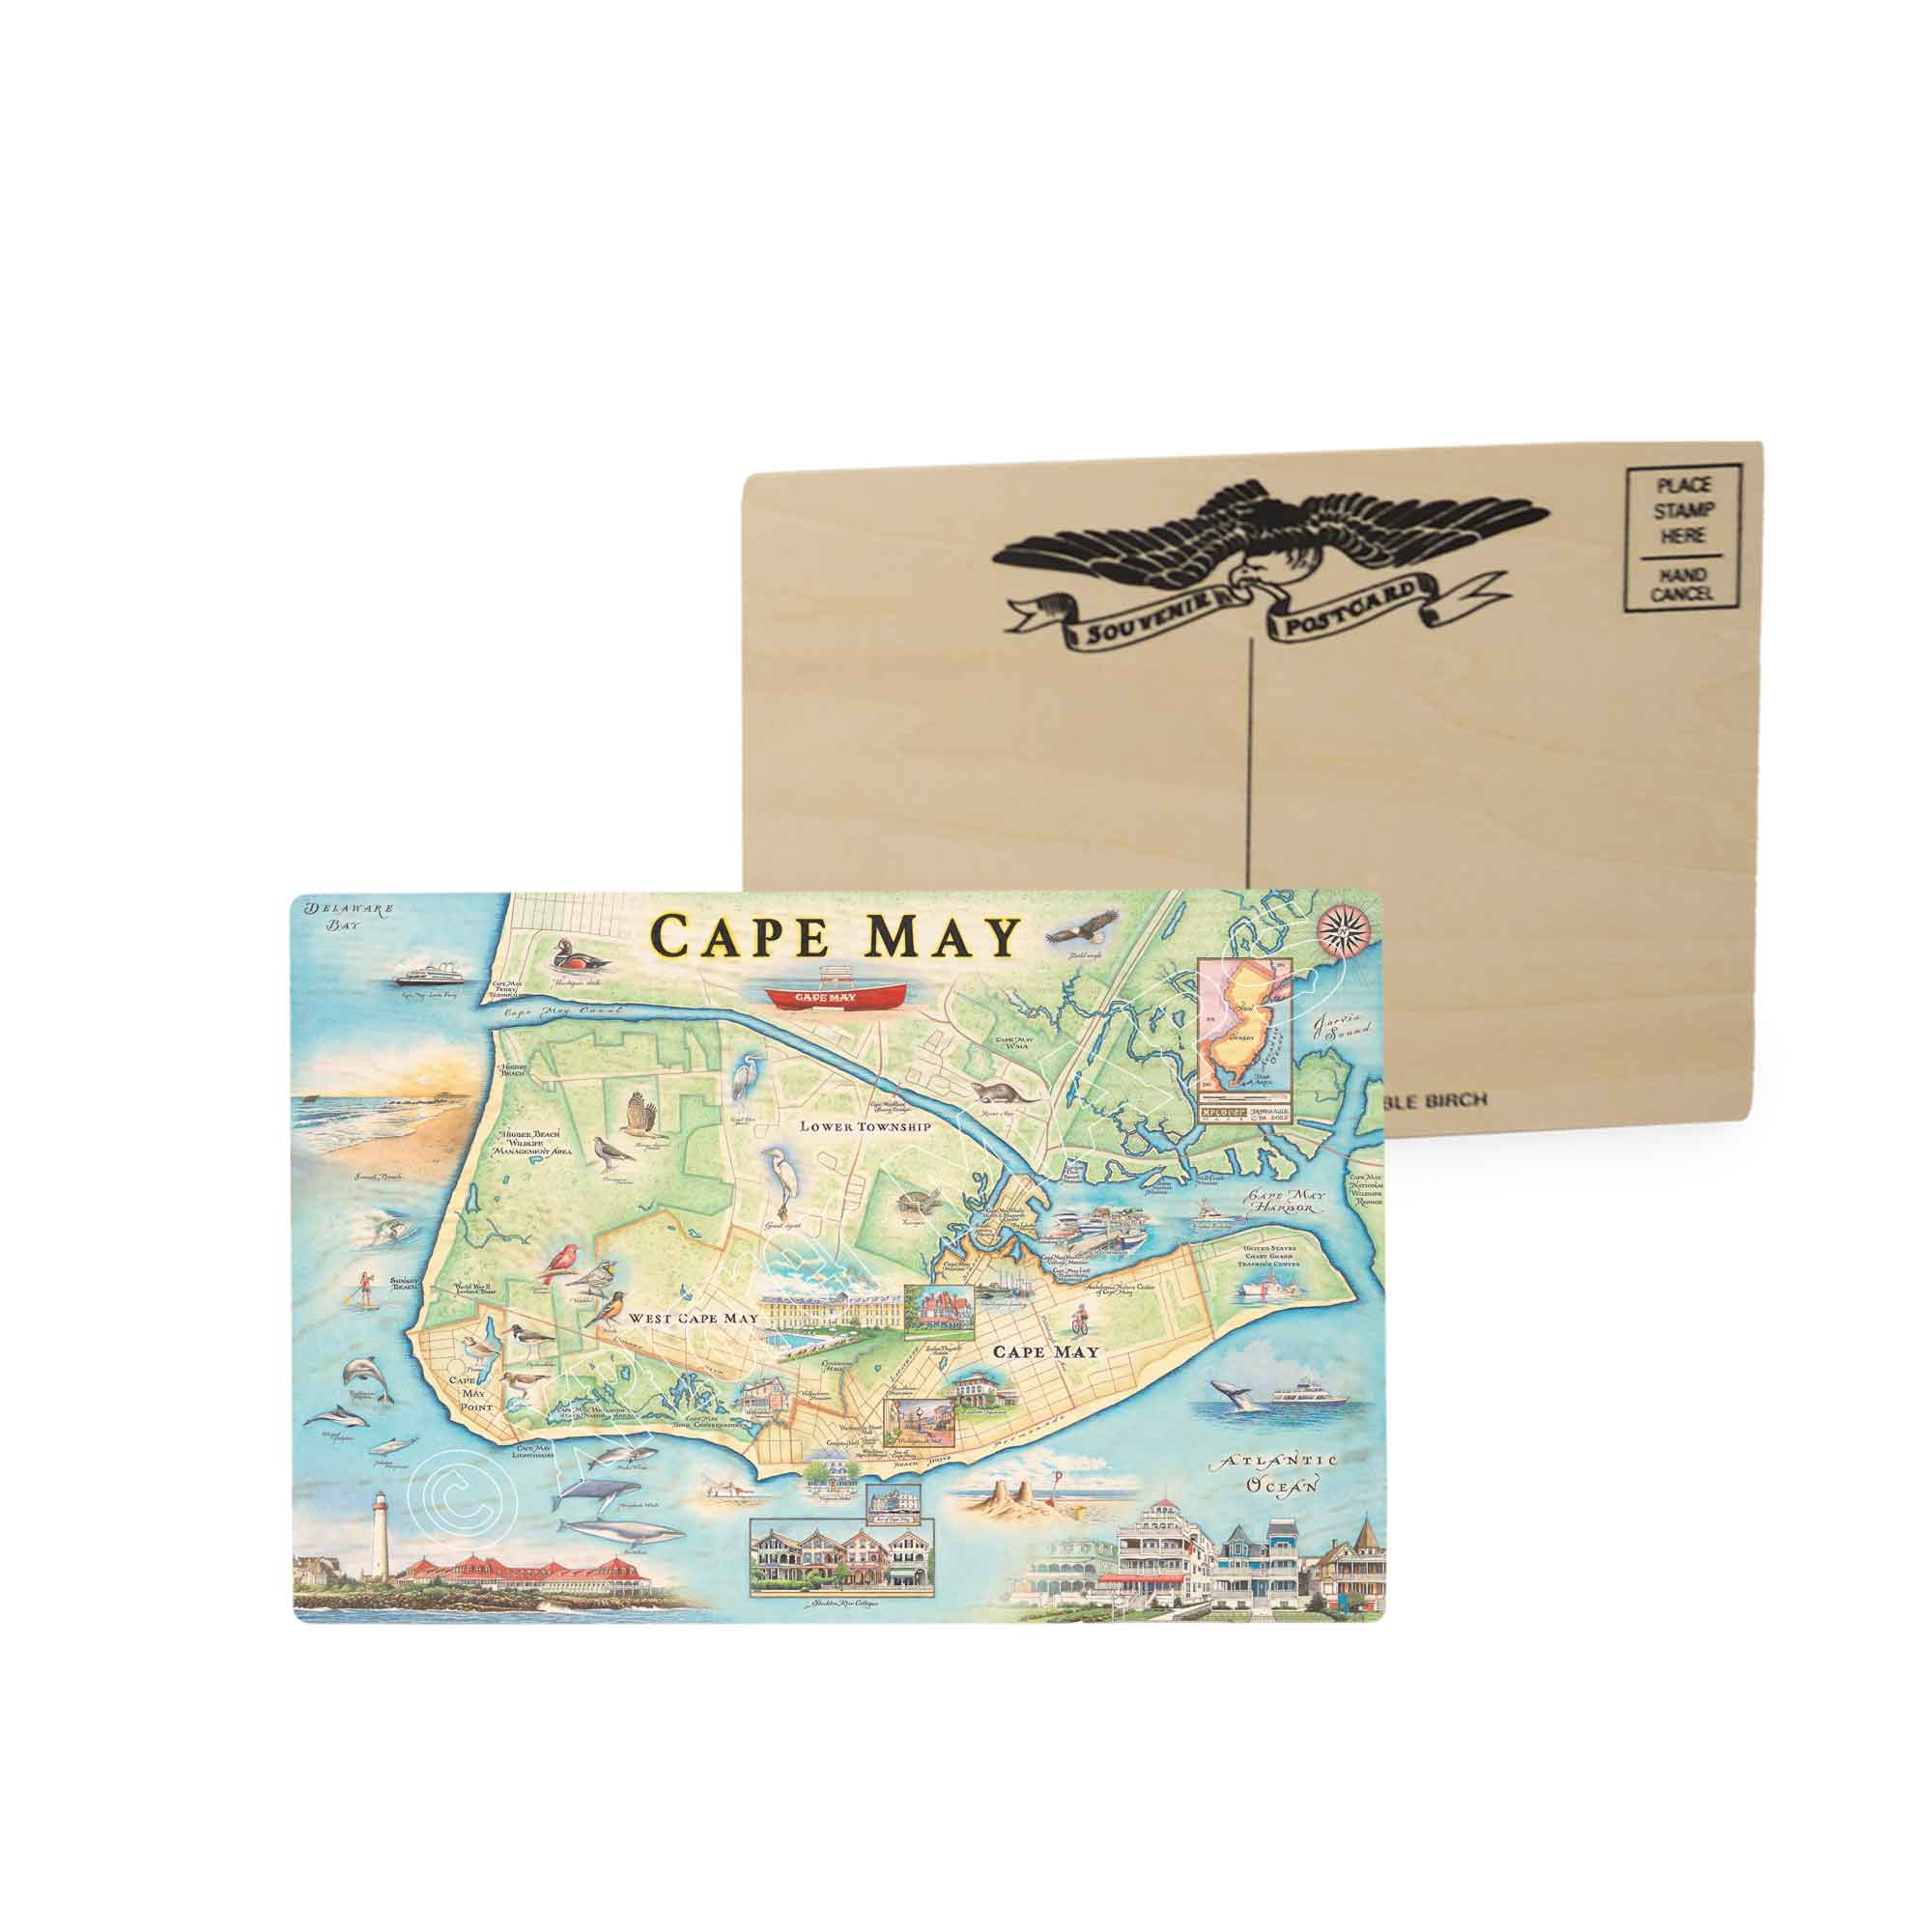 New Jersey's Cape May Map wooden postcard features heron and whale species. Map features Cape May, Lower Township, West Cape May, Cape May Harbor, Congress Hall, Washington St. Mall, and Cape May Bird Observatory. Postcards are in earth tone colors of blue and green. 